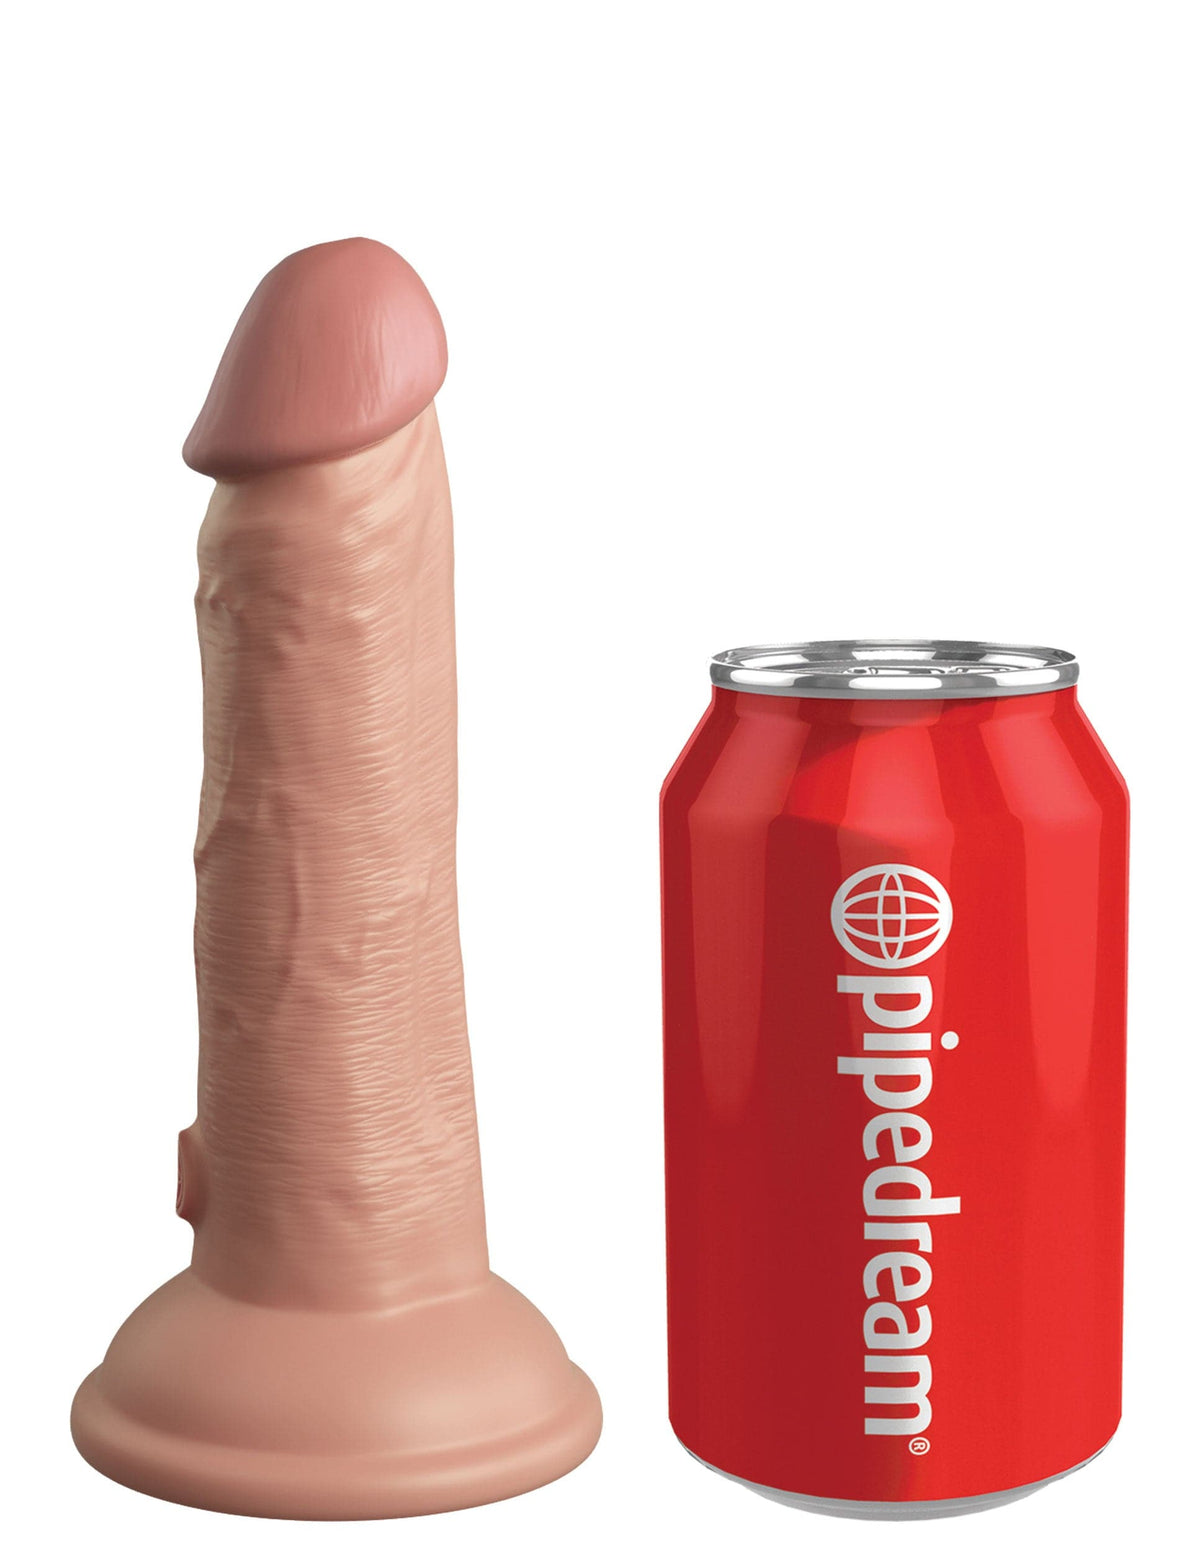 king cock elite 6 inch silicone dual density cock light